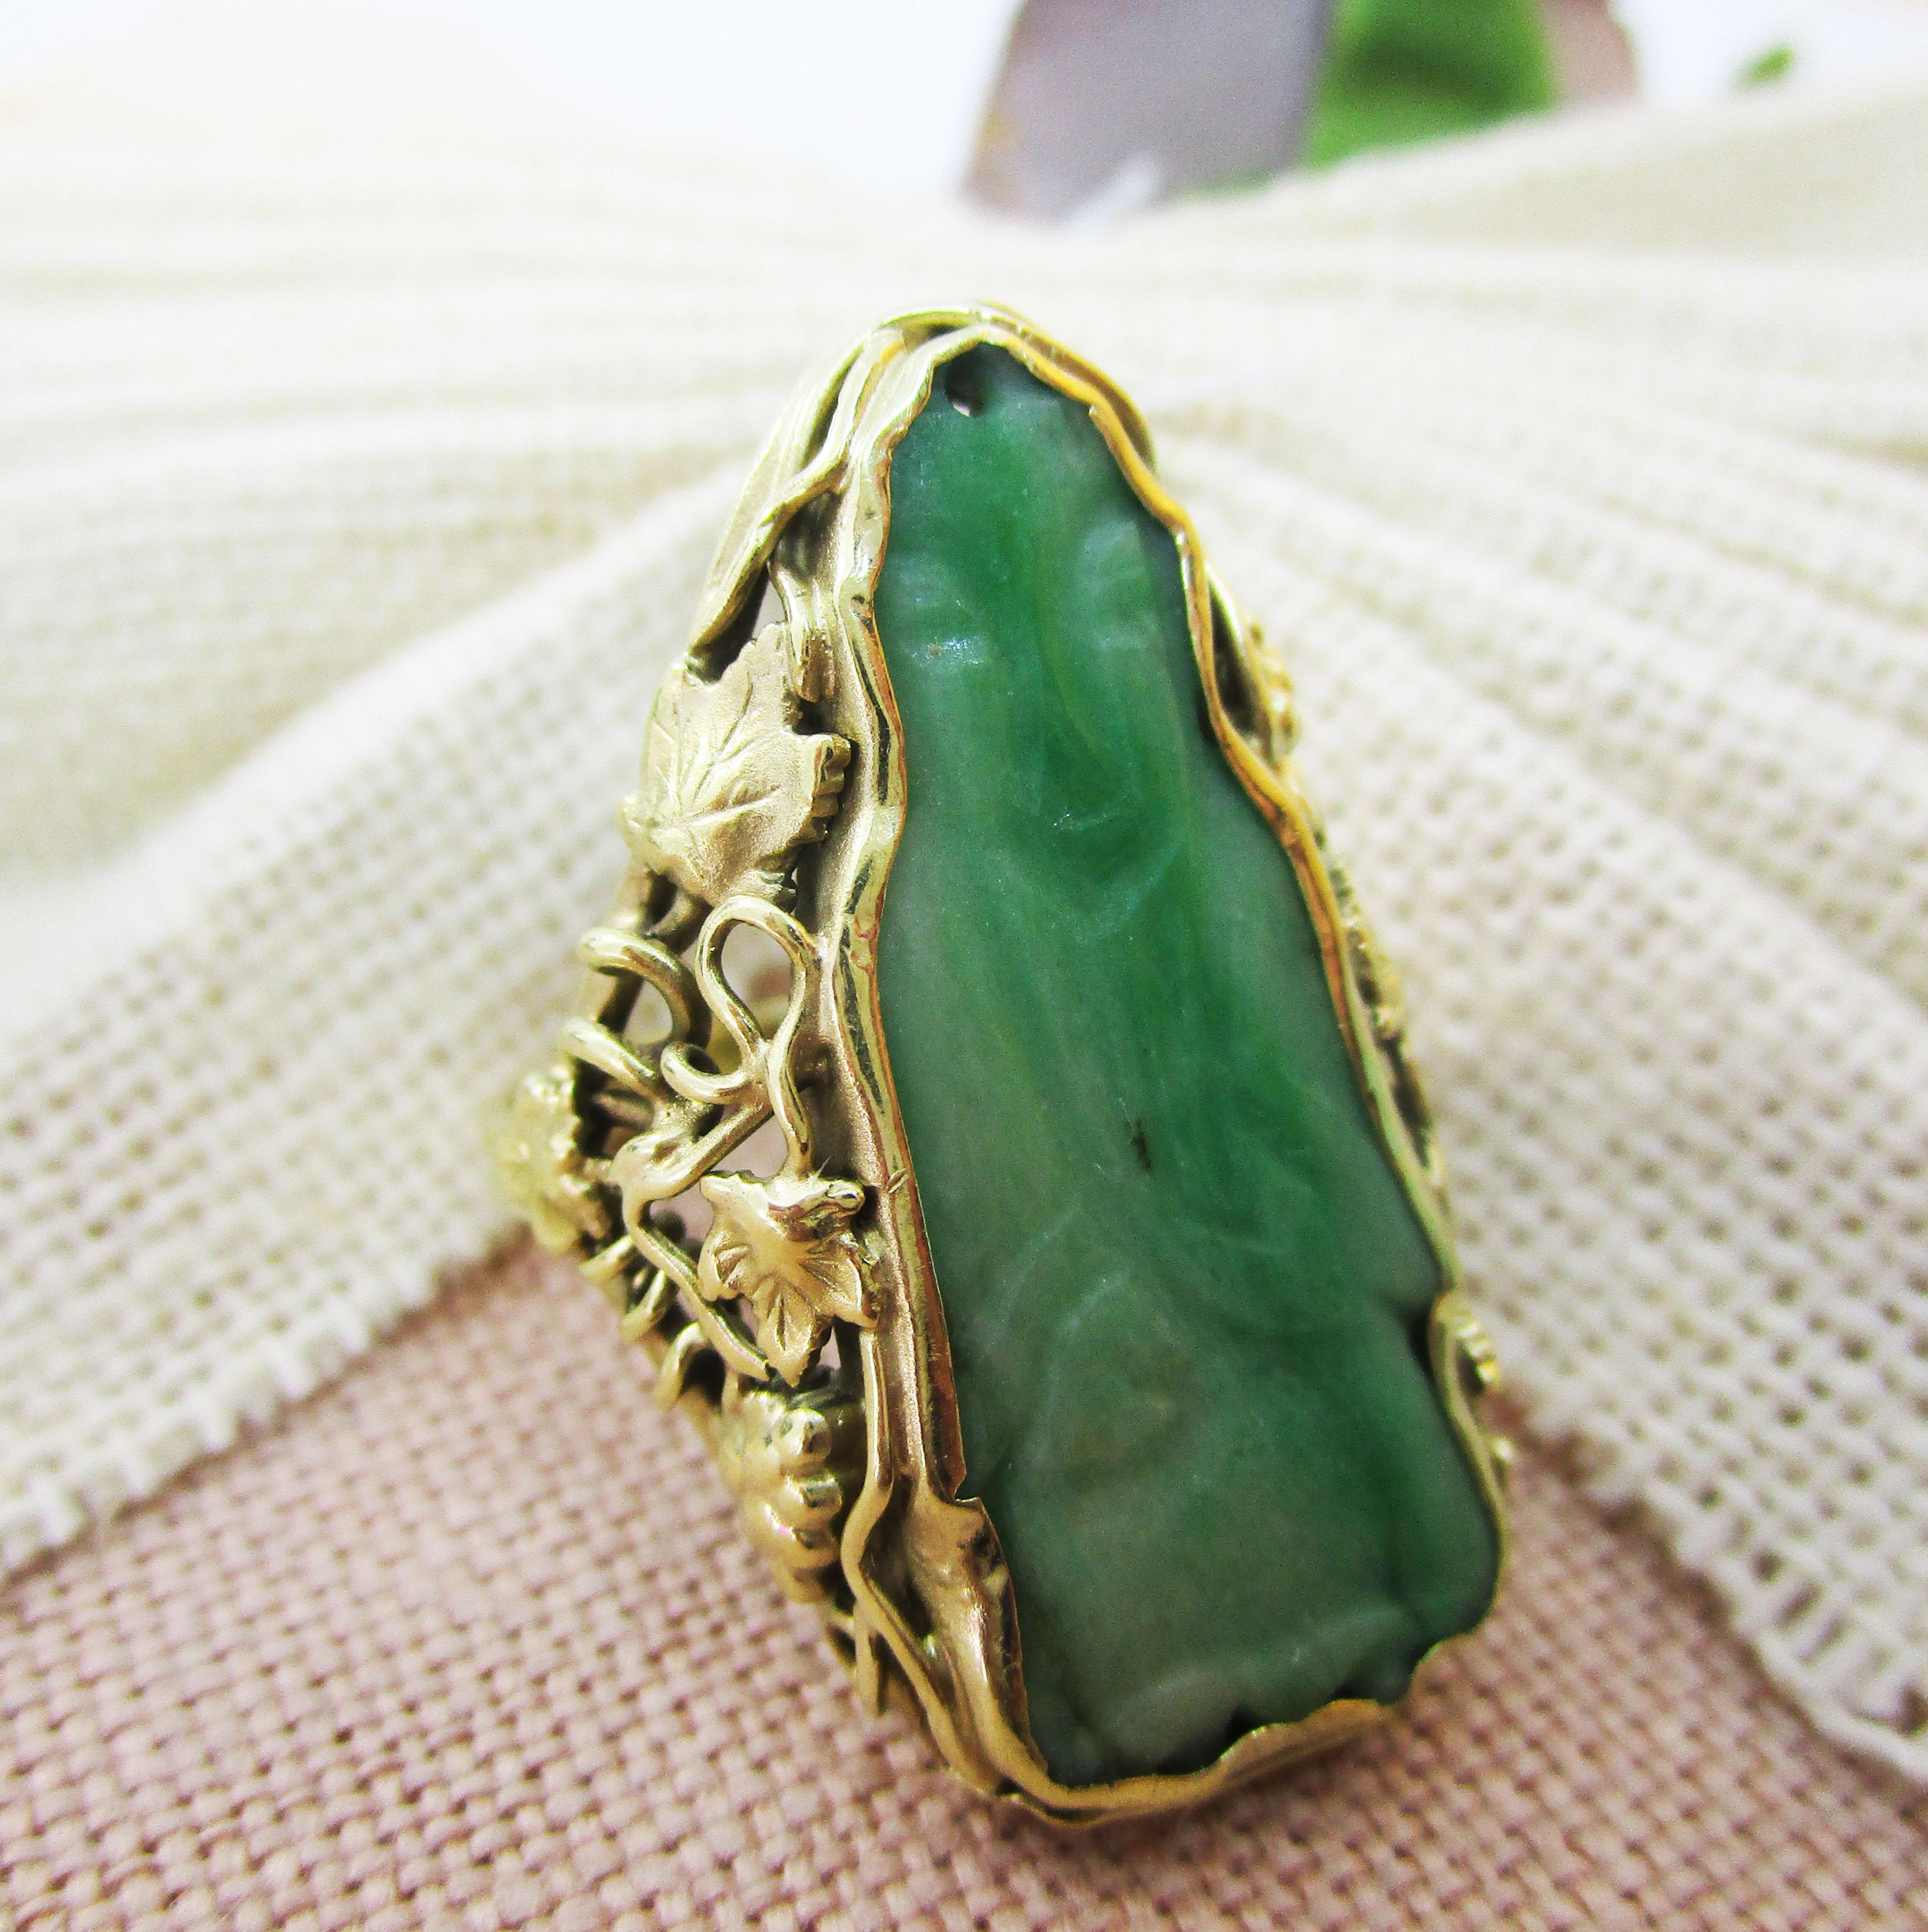 This killer Arts and Crafts ring is in 14k green gold and features a stunning carved jade center! The ring has a distinctly Arts and Crafts design that is clear in the curling vines of the grapevine and leaf motif that makes up the shoulders and